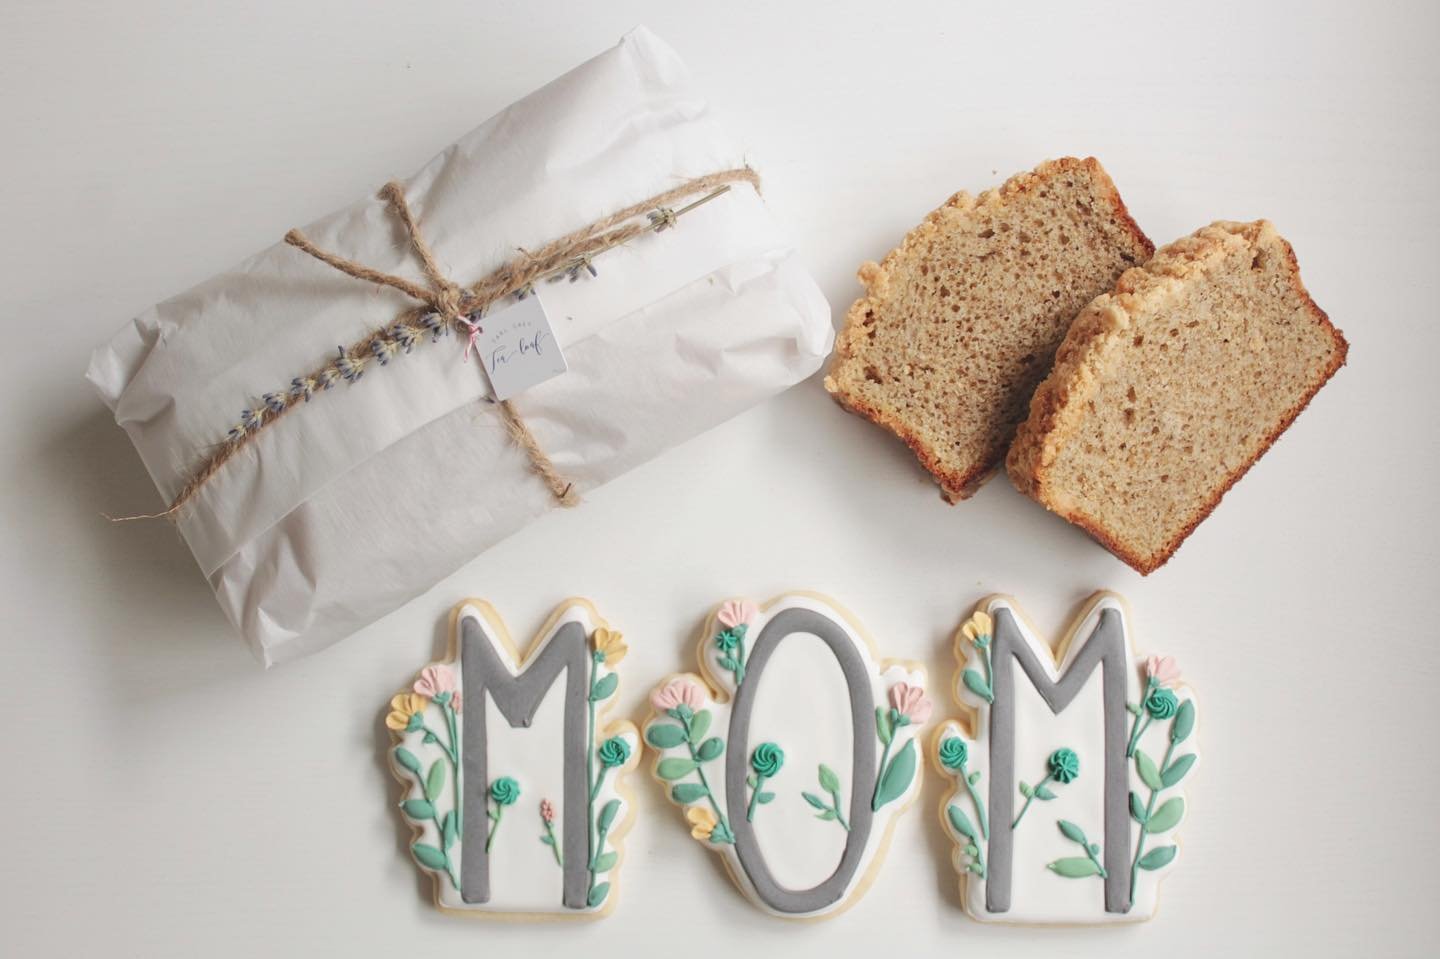 Mother&rsquo;s Day offerings will be available @moss_postpartum_house May 9th-11th.
We will have our Earl Grey Tea Loaves as well as vanilla sugar &ldquo;Mom&rdquo; gift boxes available. 

#fineanddandy #fineanddandysugarartistry #yyc #yycfoodie #yyc